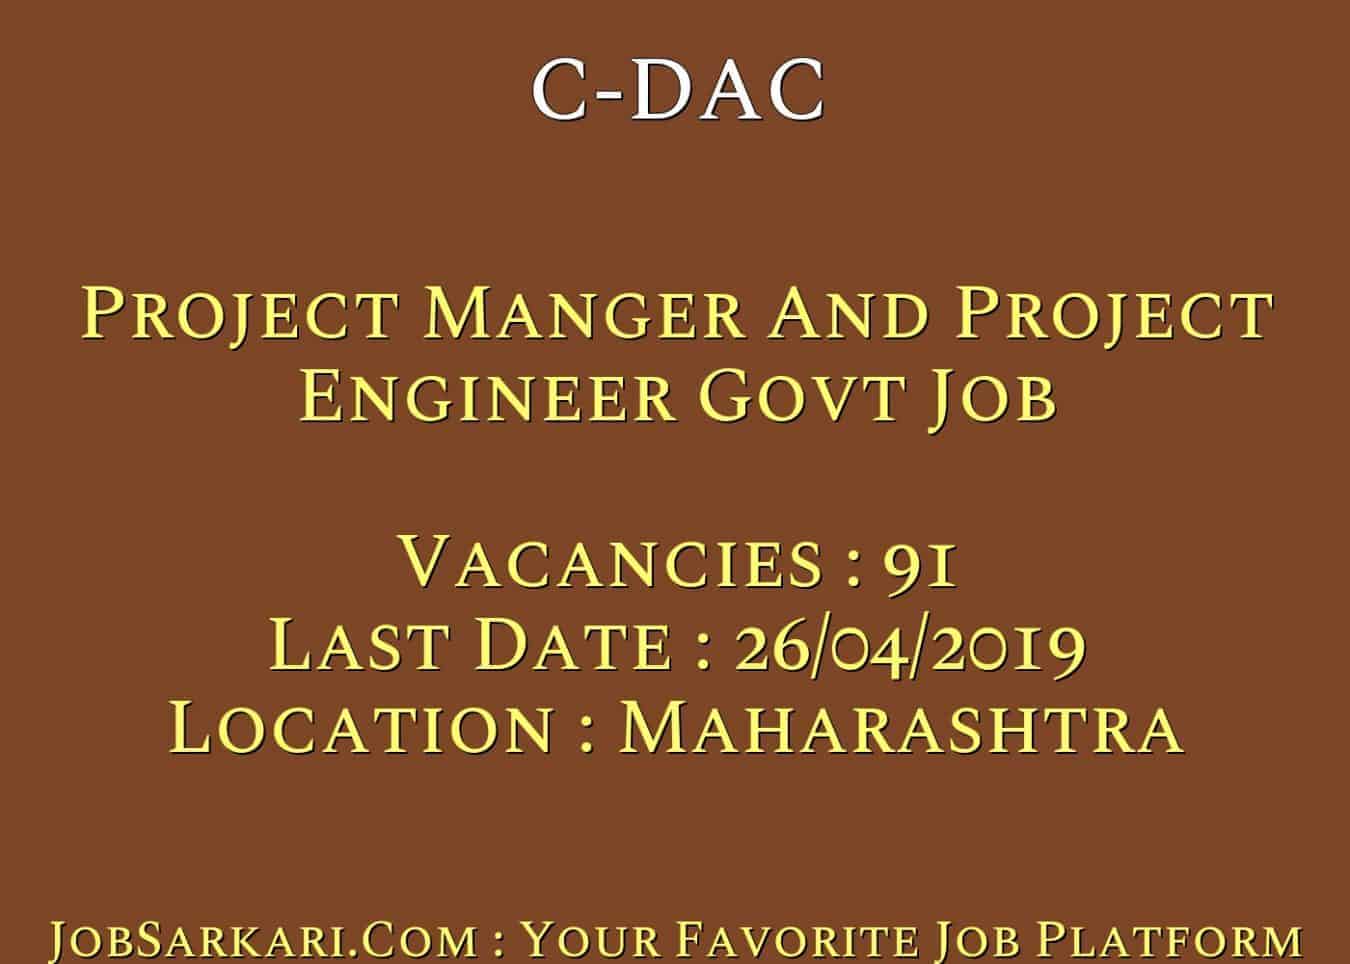 C-DAC Recruitment 2019 For Project Manger And Project Engineer Govt Job